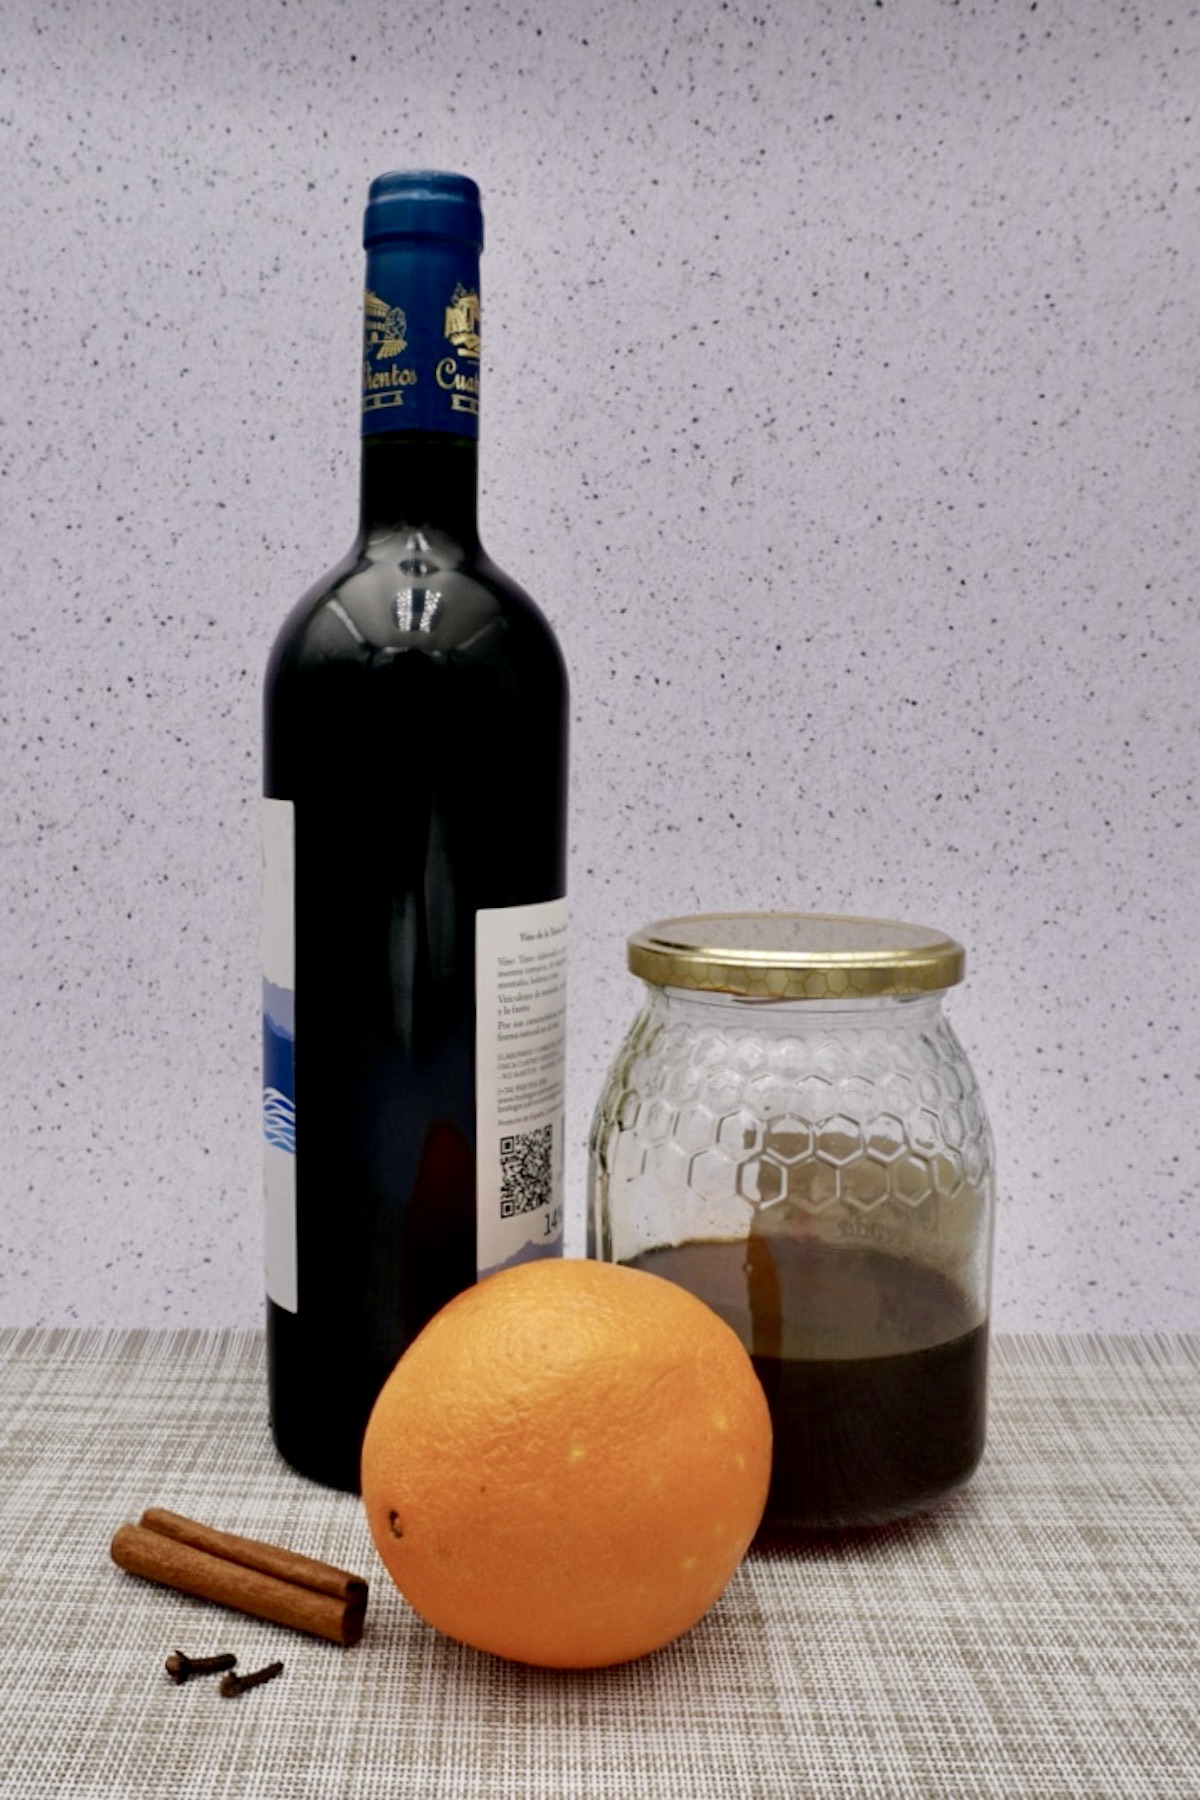 Wine, honey, an orange and spices